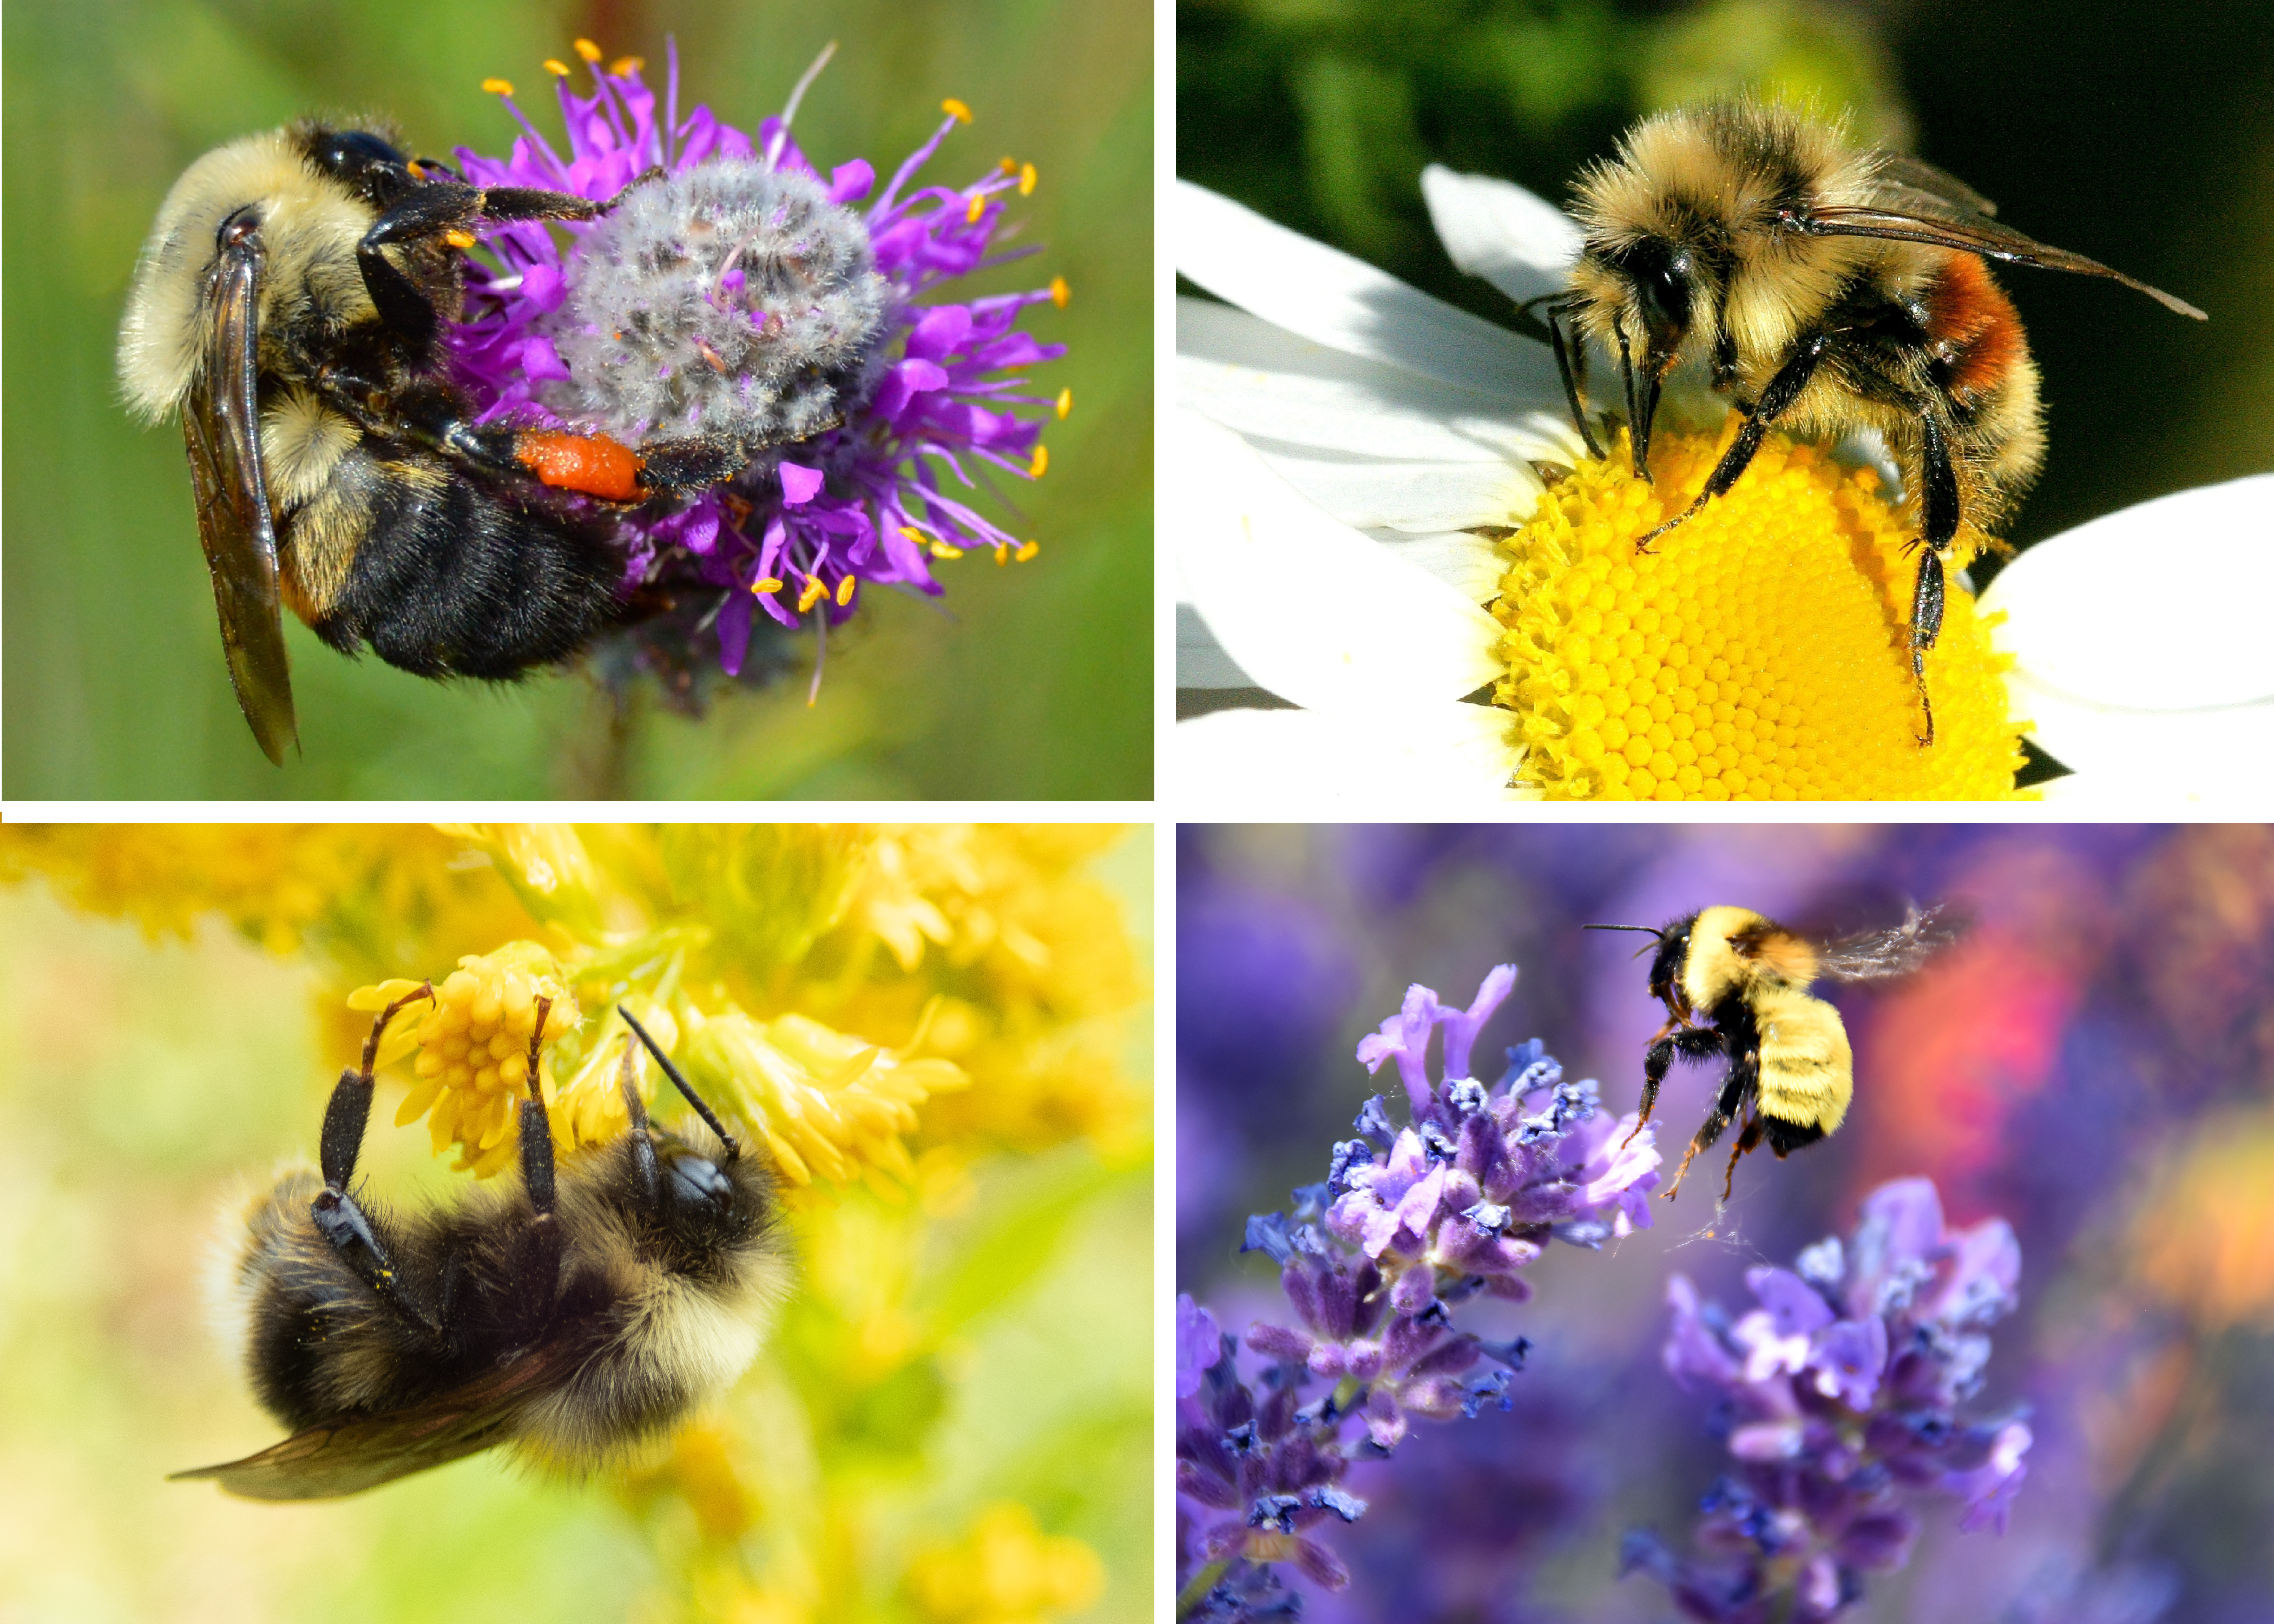 Appreciate Bees for Their Hard Work! Understand How Their Pollination and Wax Benefits Our Gardens, Home, and Diet.